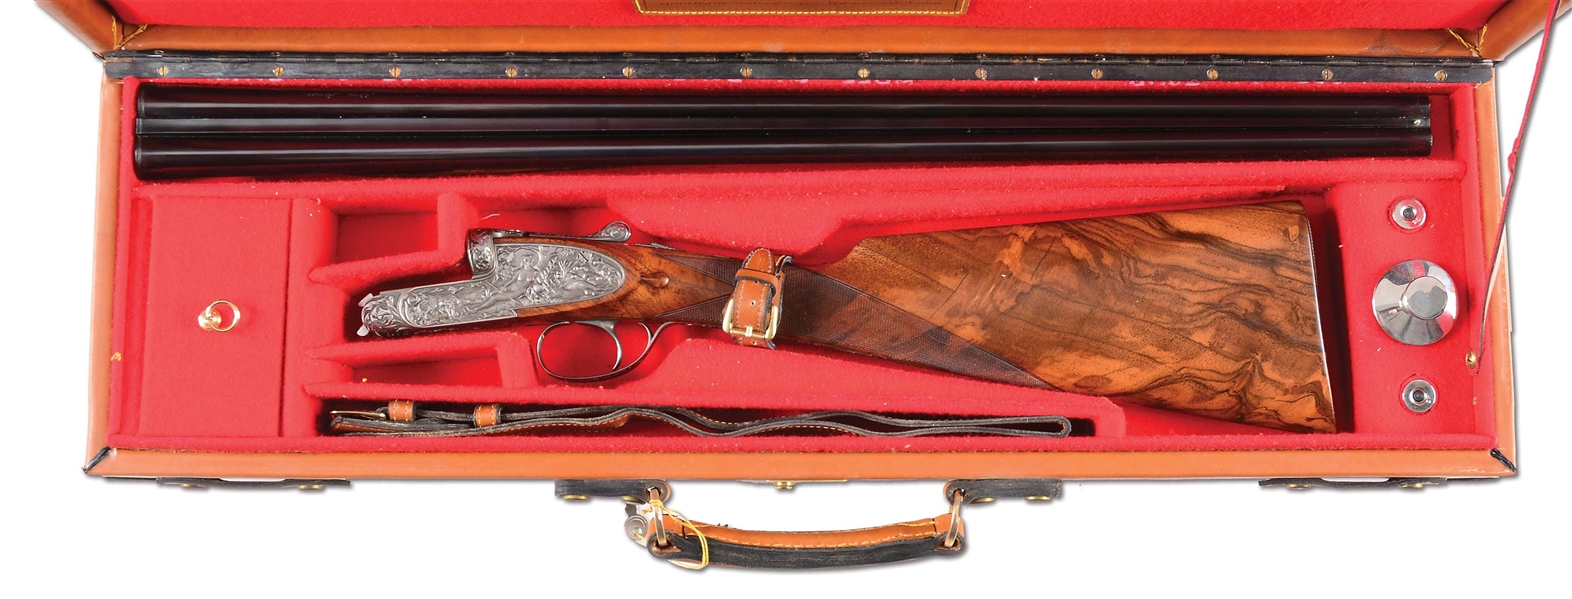 (M) INCREDIBLE FAMARS ABBIATICO & SALVINELLI VENERE EXTRA LUSSO 28 BORE SHOTGUN ENGRAVED BY KEN HUNT IN INCREDIBLE RELIEF PATTERN WITH CASE.